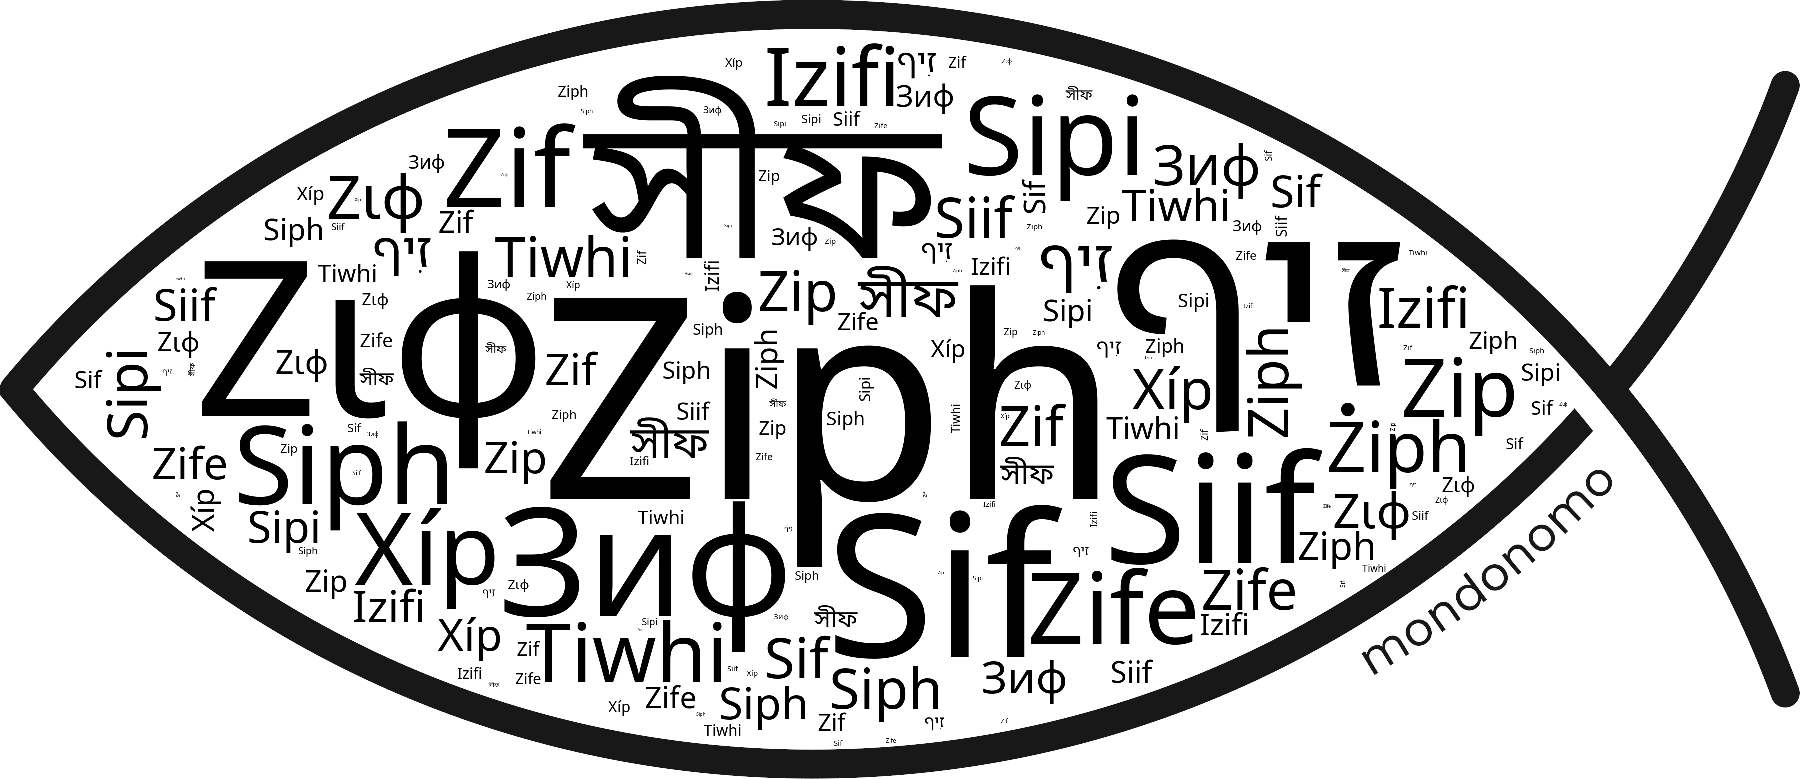 Name Ziph in the world's Bibles